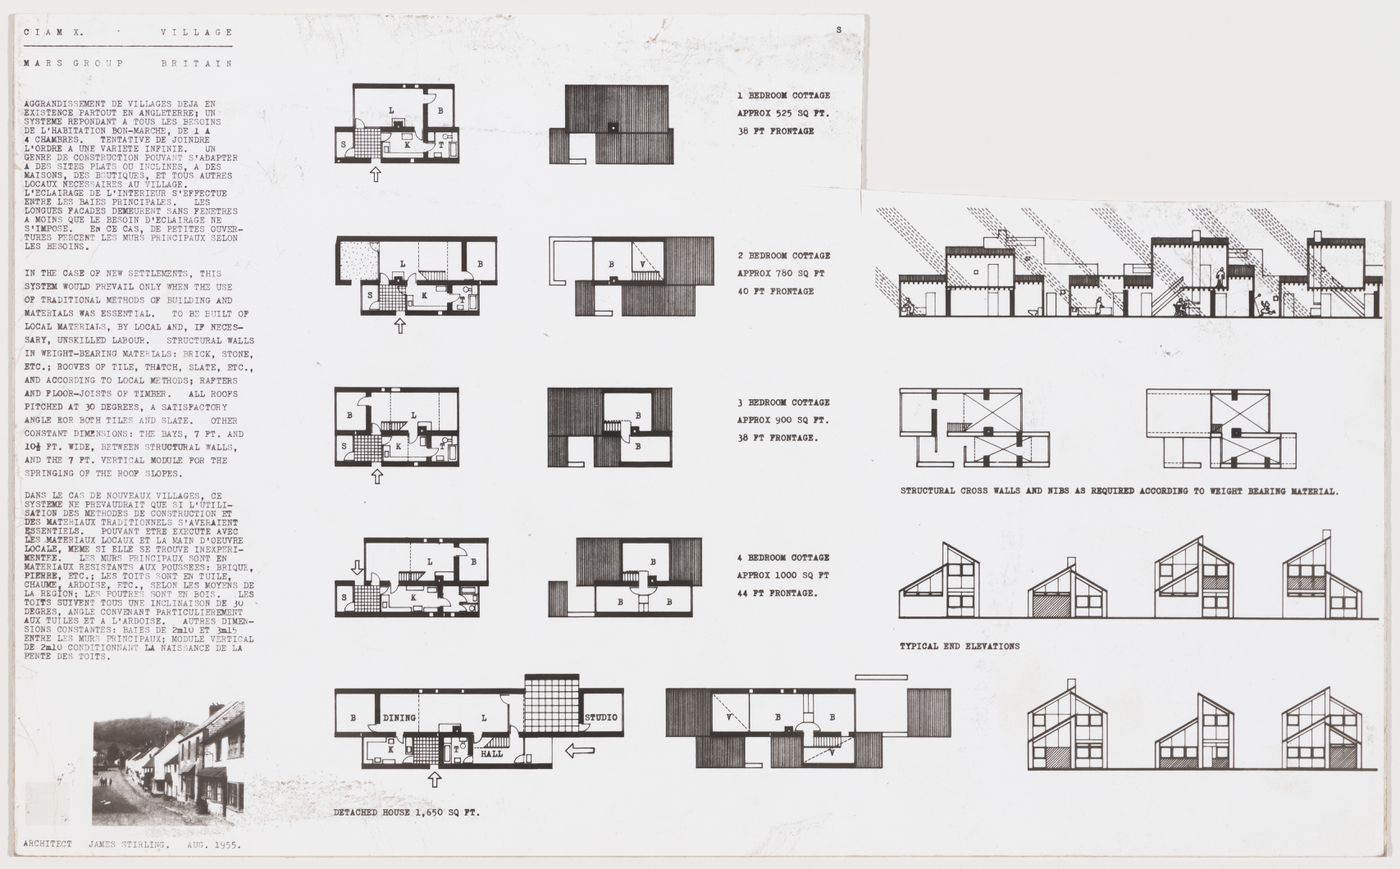 View of presentation drawing for Village housing, CIAM X